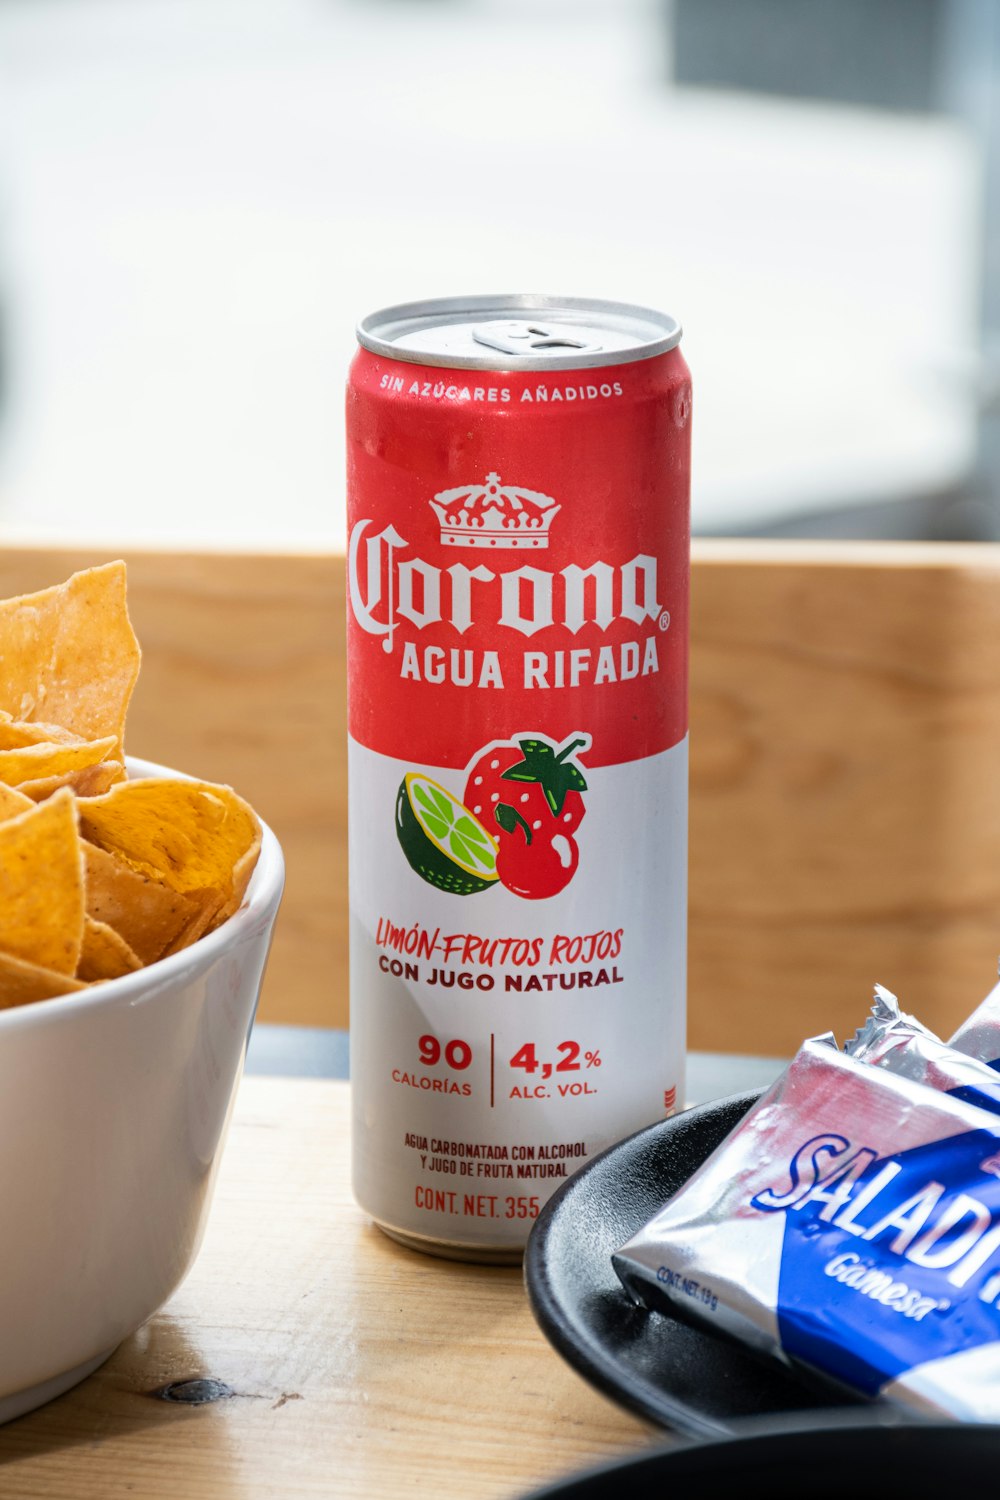 a bowl of tortilla chips next to a can of corona